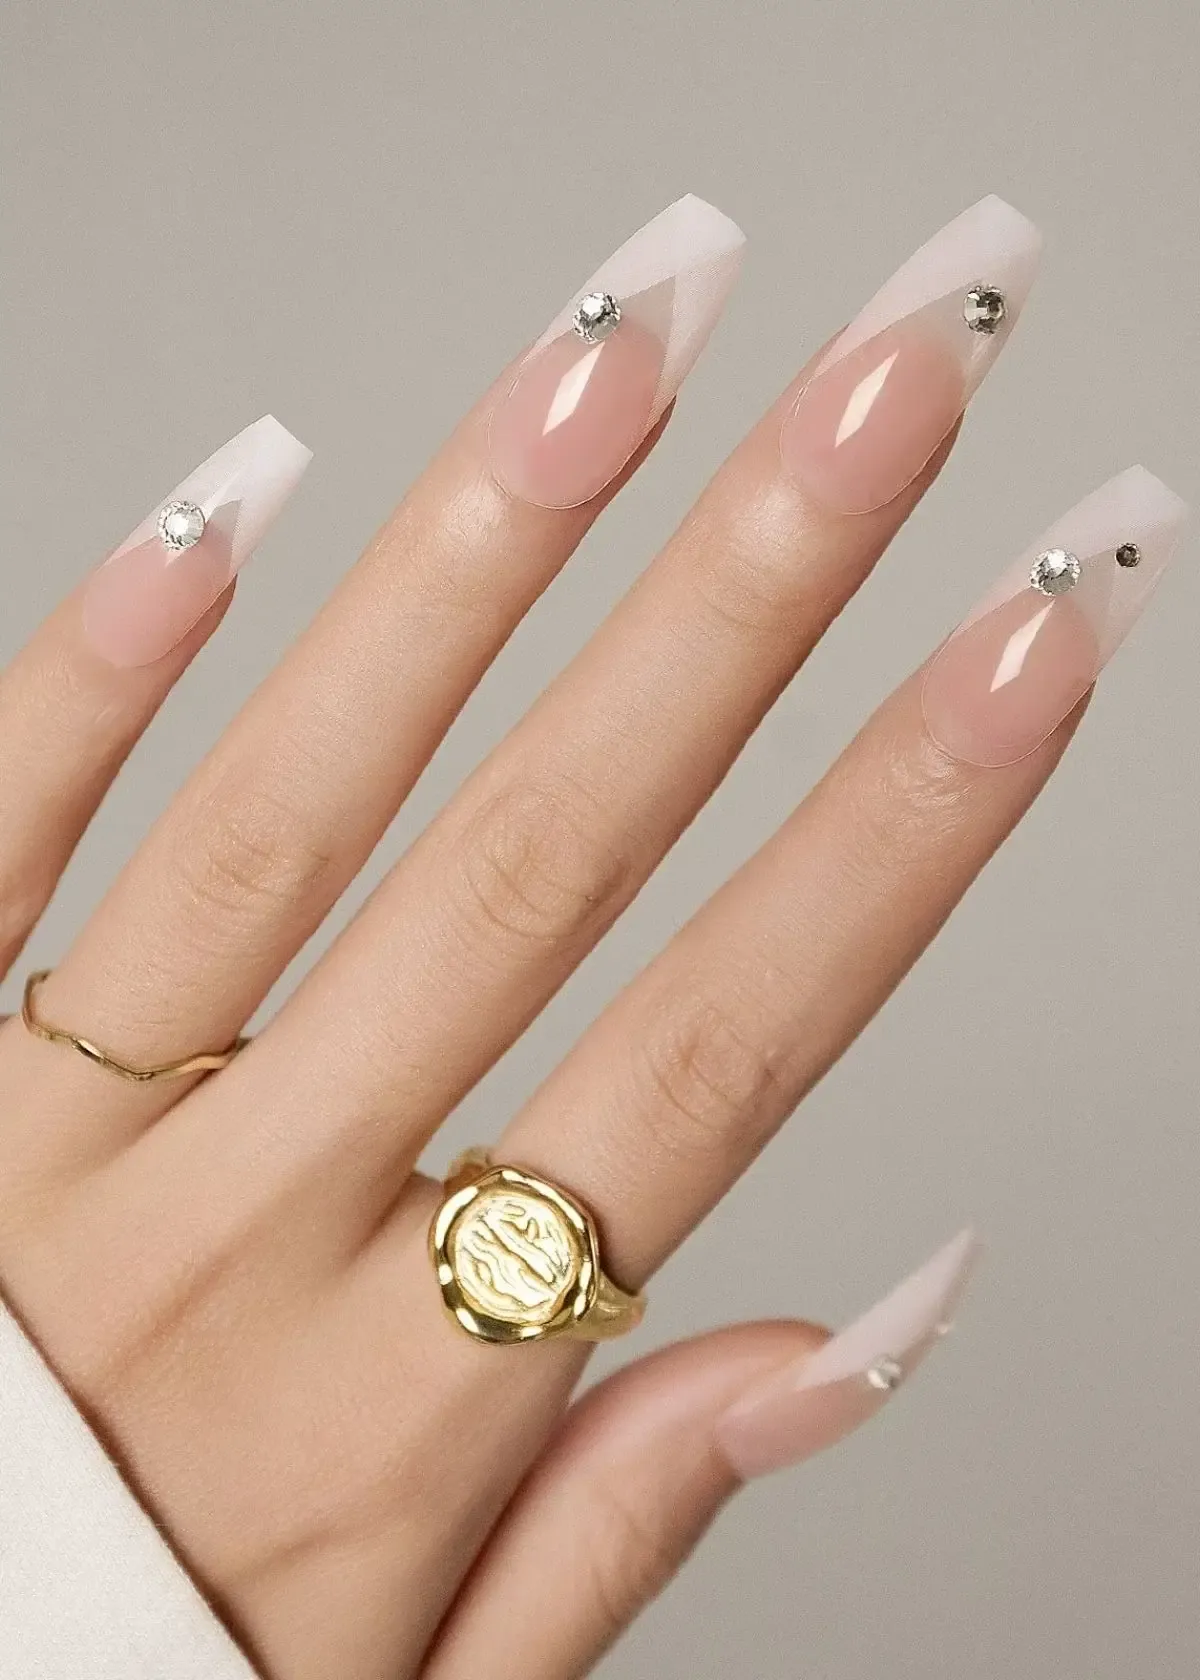 Is a French manicure suitable for all nail lengths?